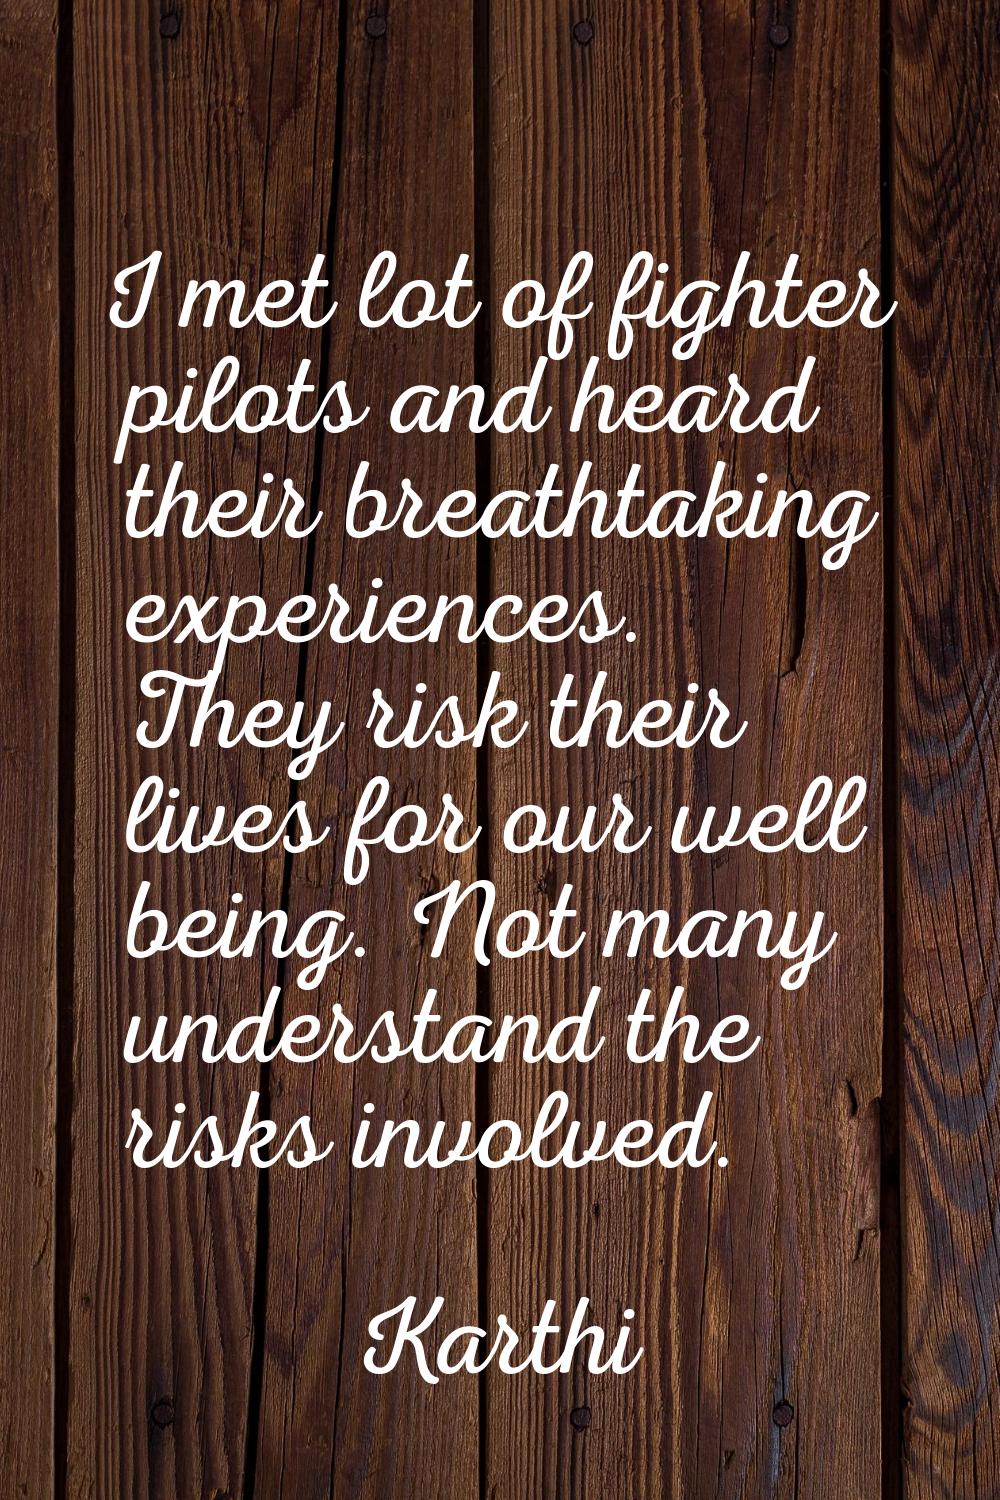 I met lot of fighter pilots and heard their breathtaking experiences. They risk their lives for our